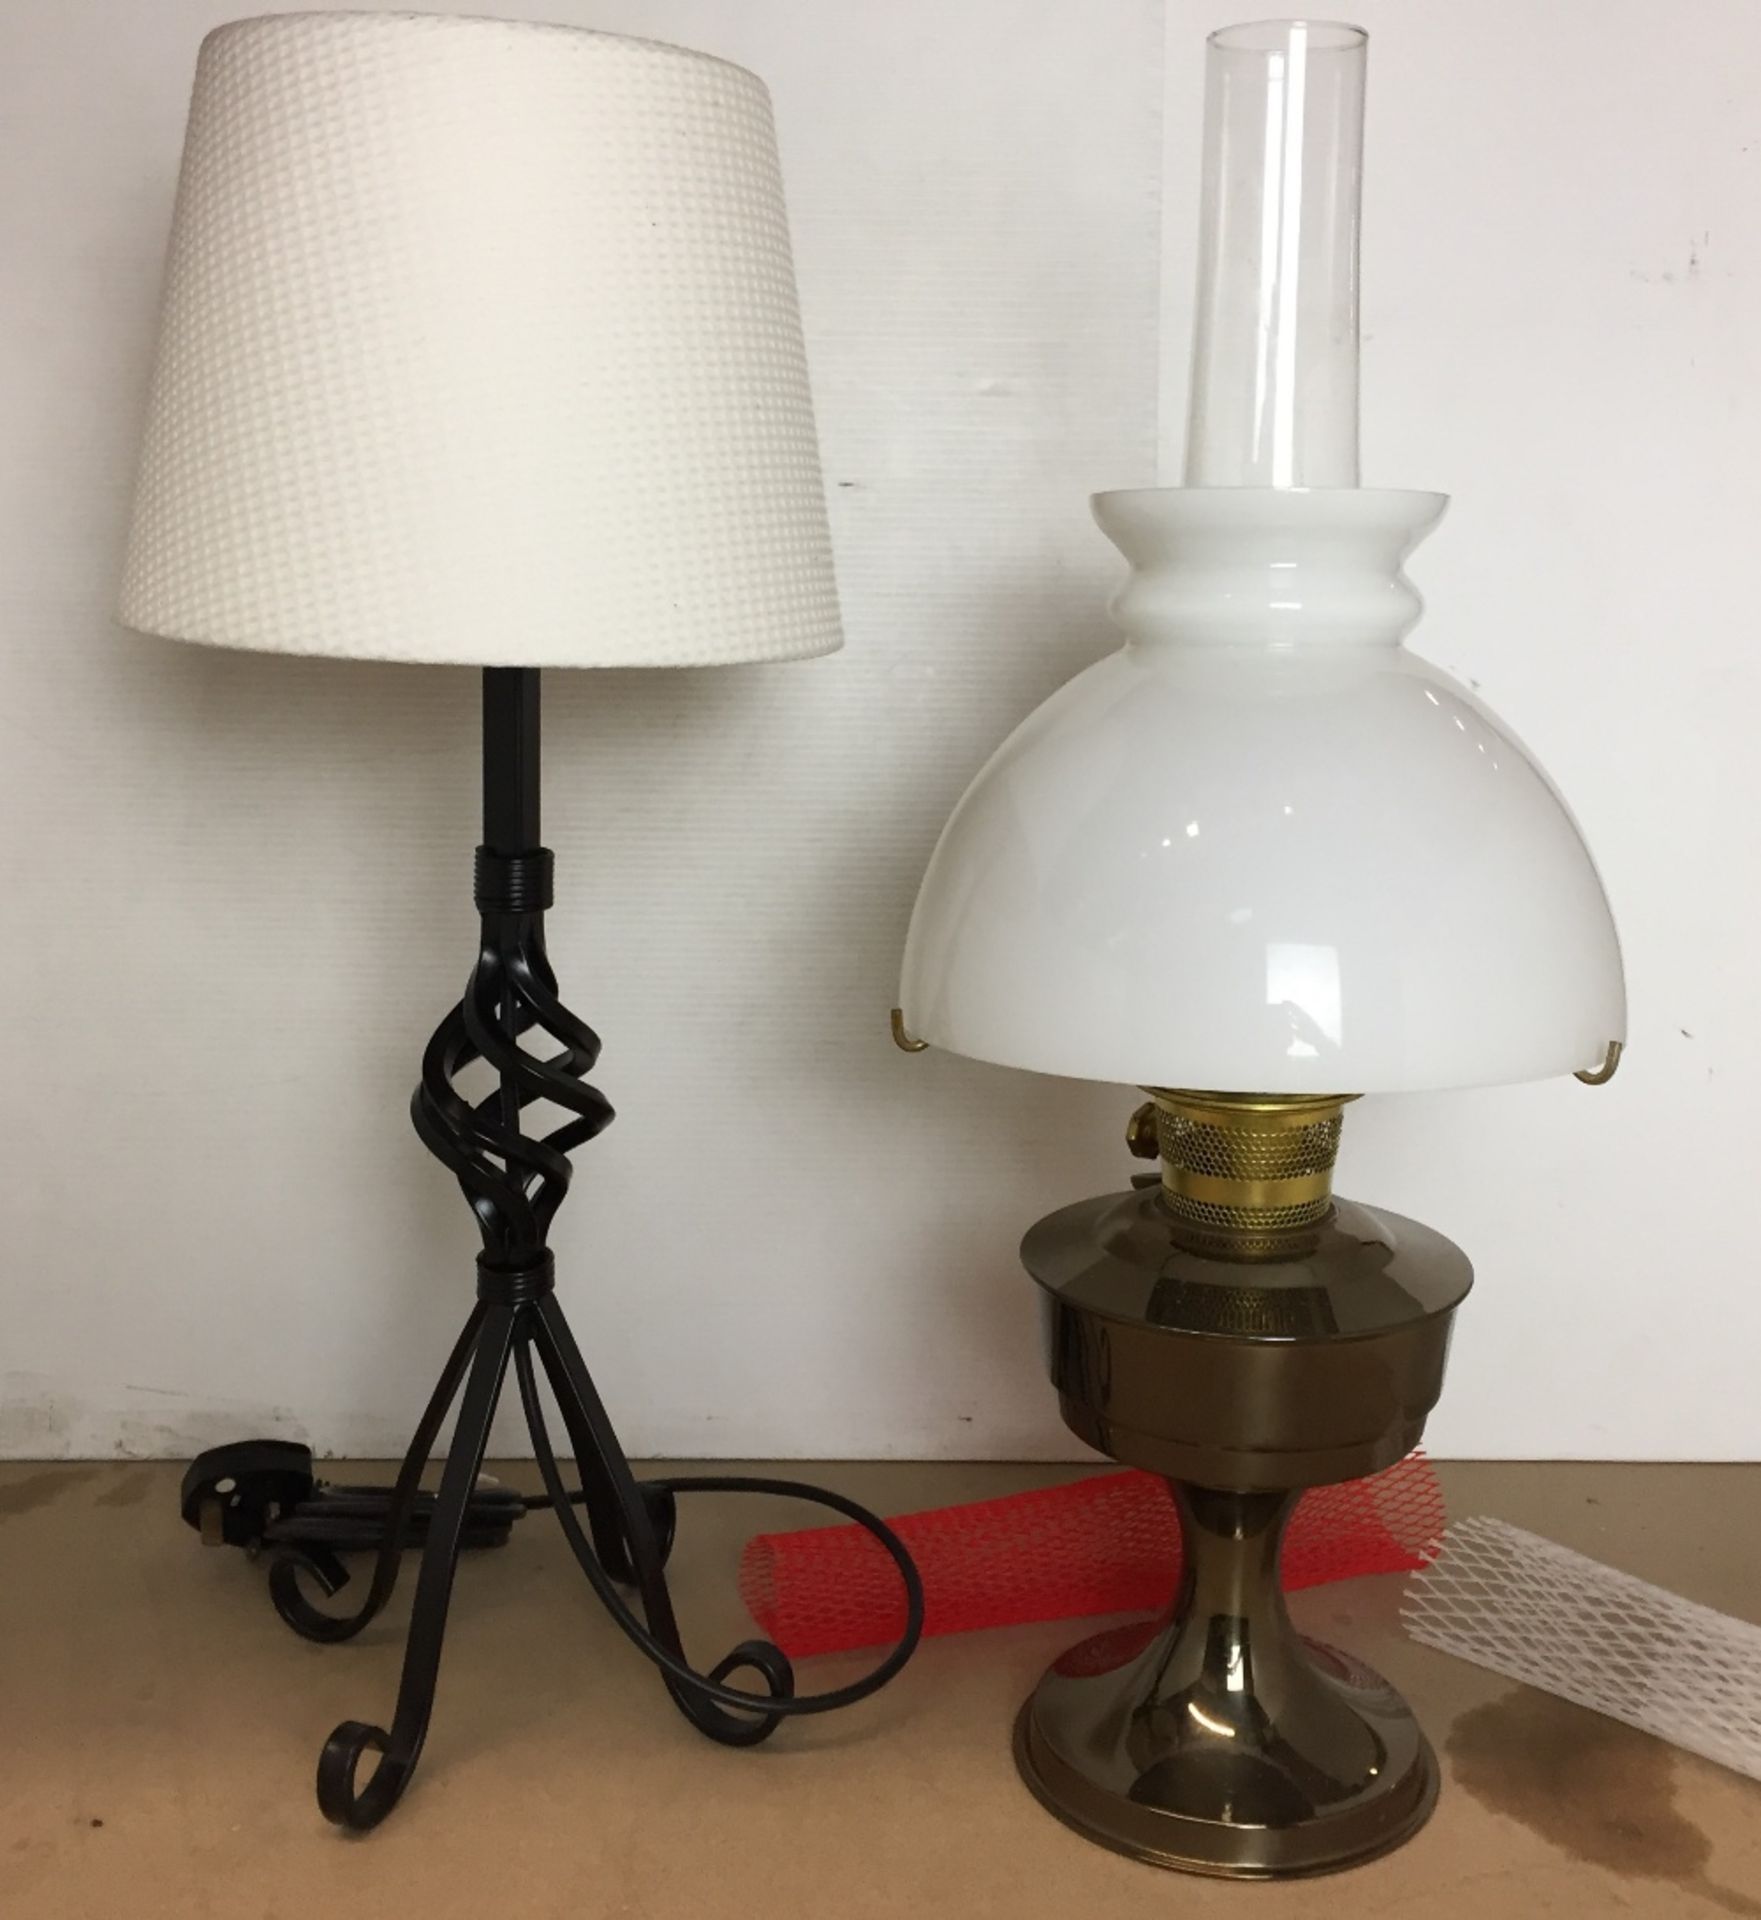 Two lamps - modern bronze effect oil lamp with glass funnel and white shade 60cm high,